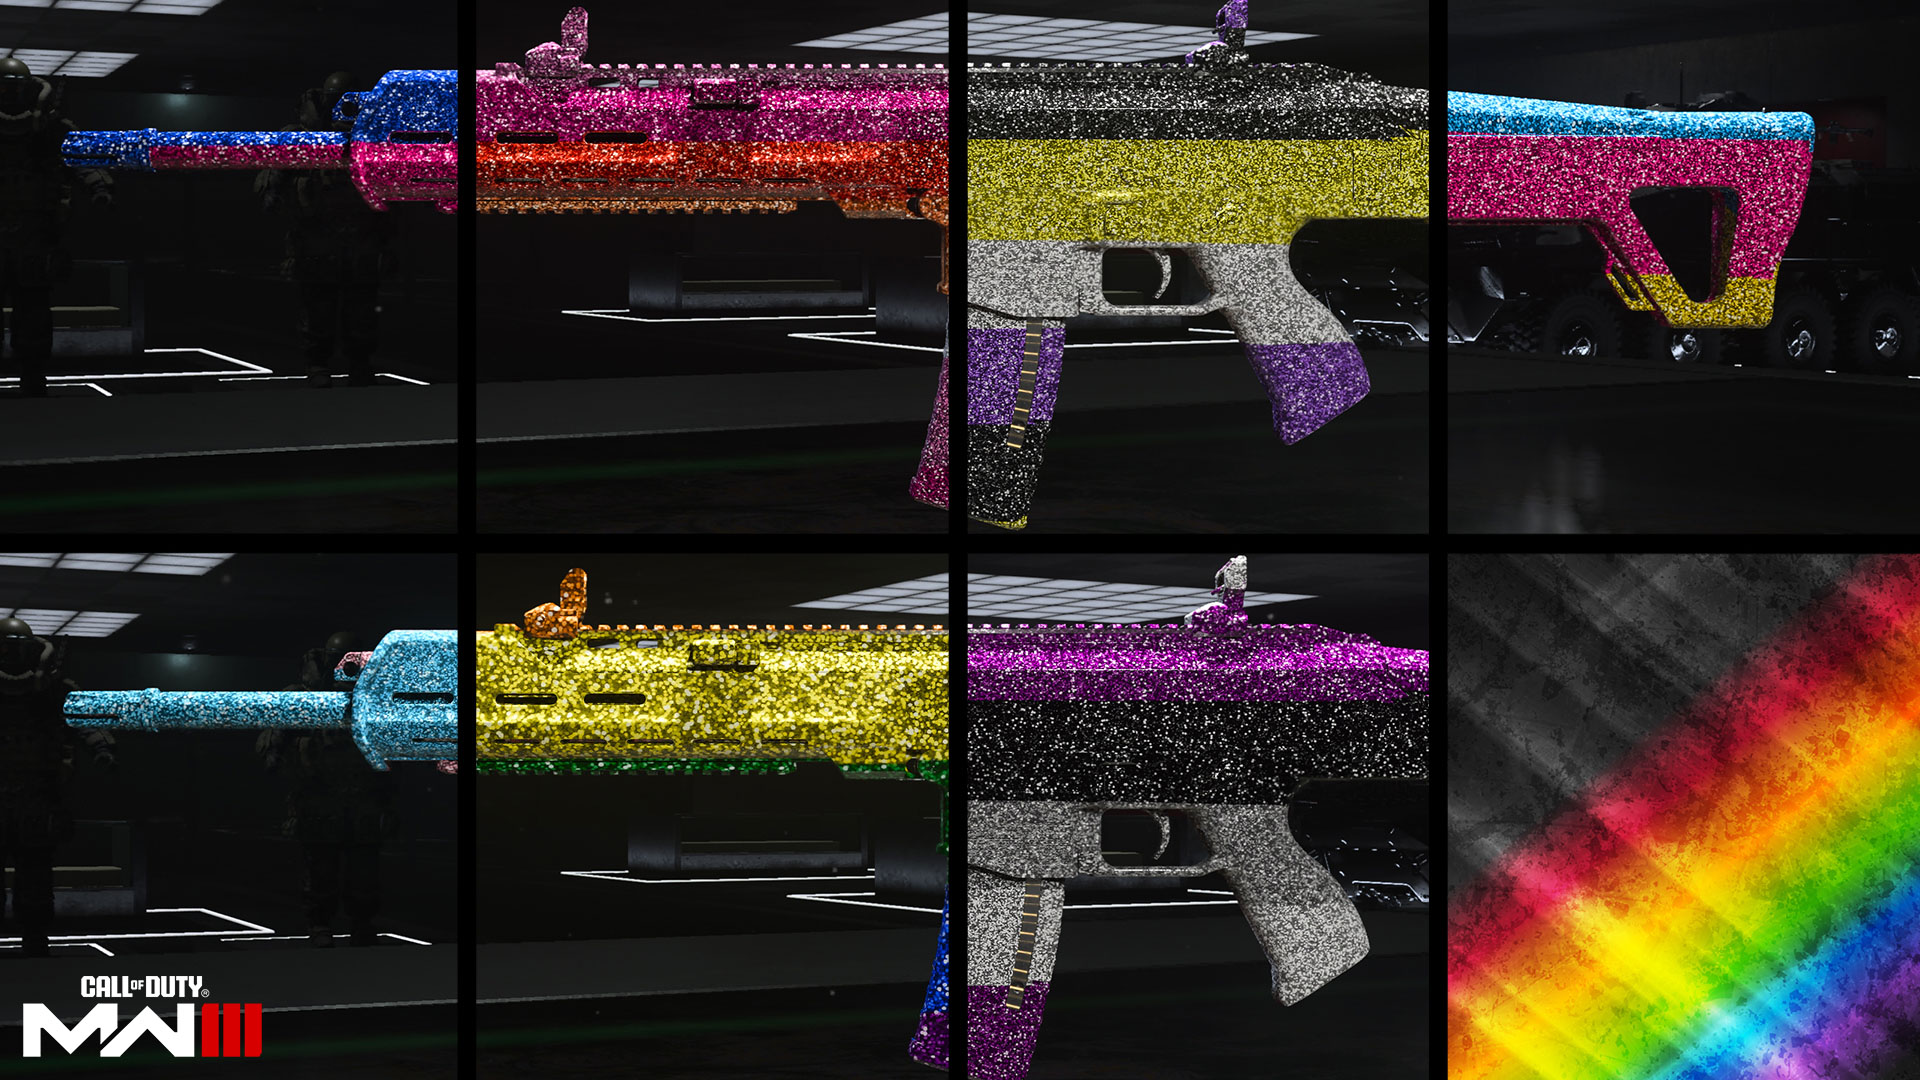 How To Unlock All Seven Lgbtq+ Weapon Camos In Modern Warfare 3 (mw3) Featured Image